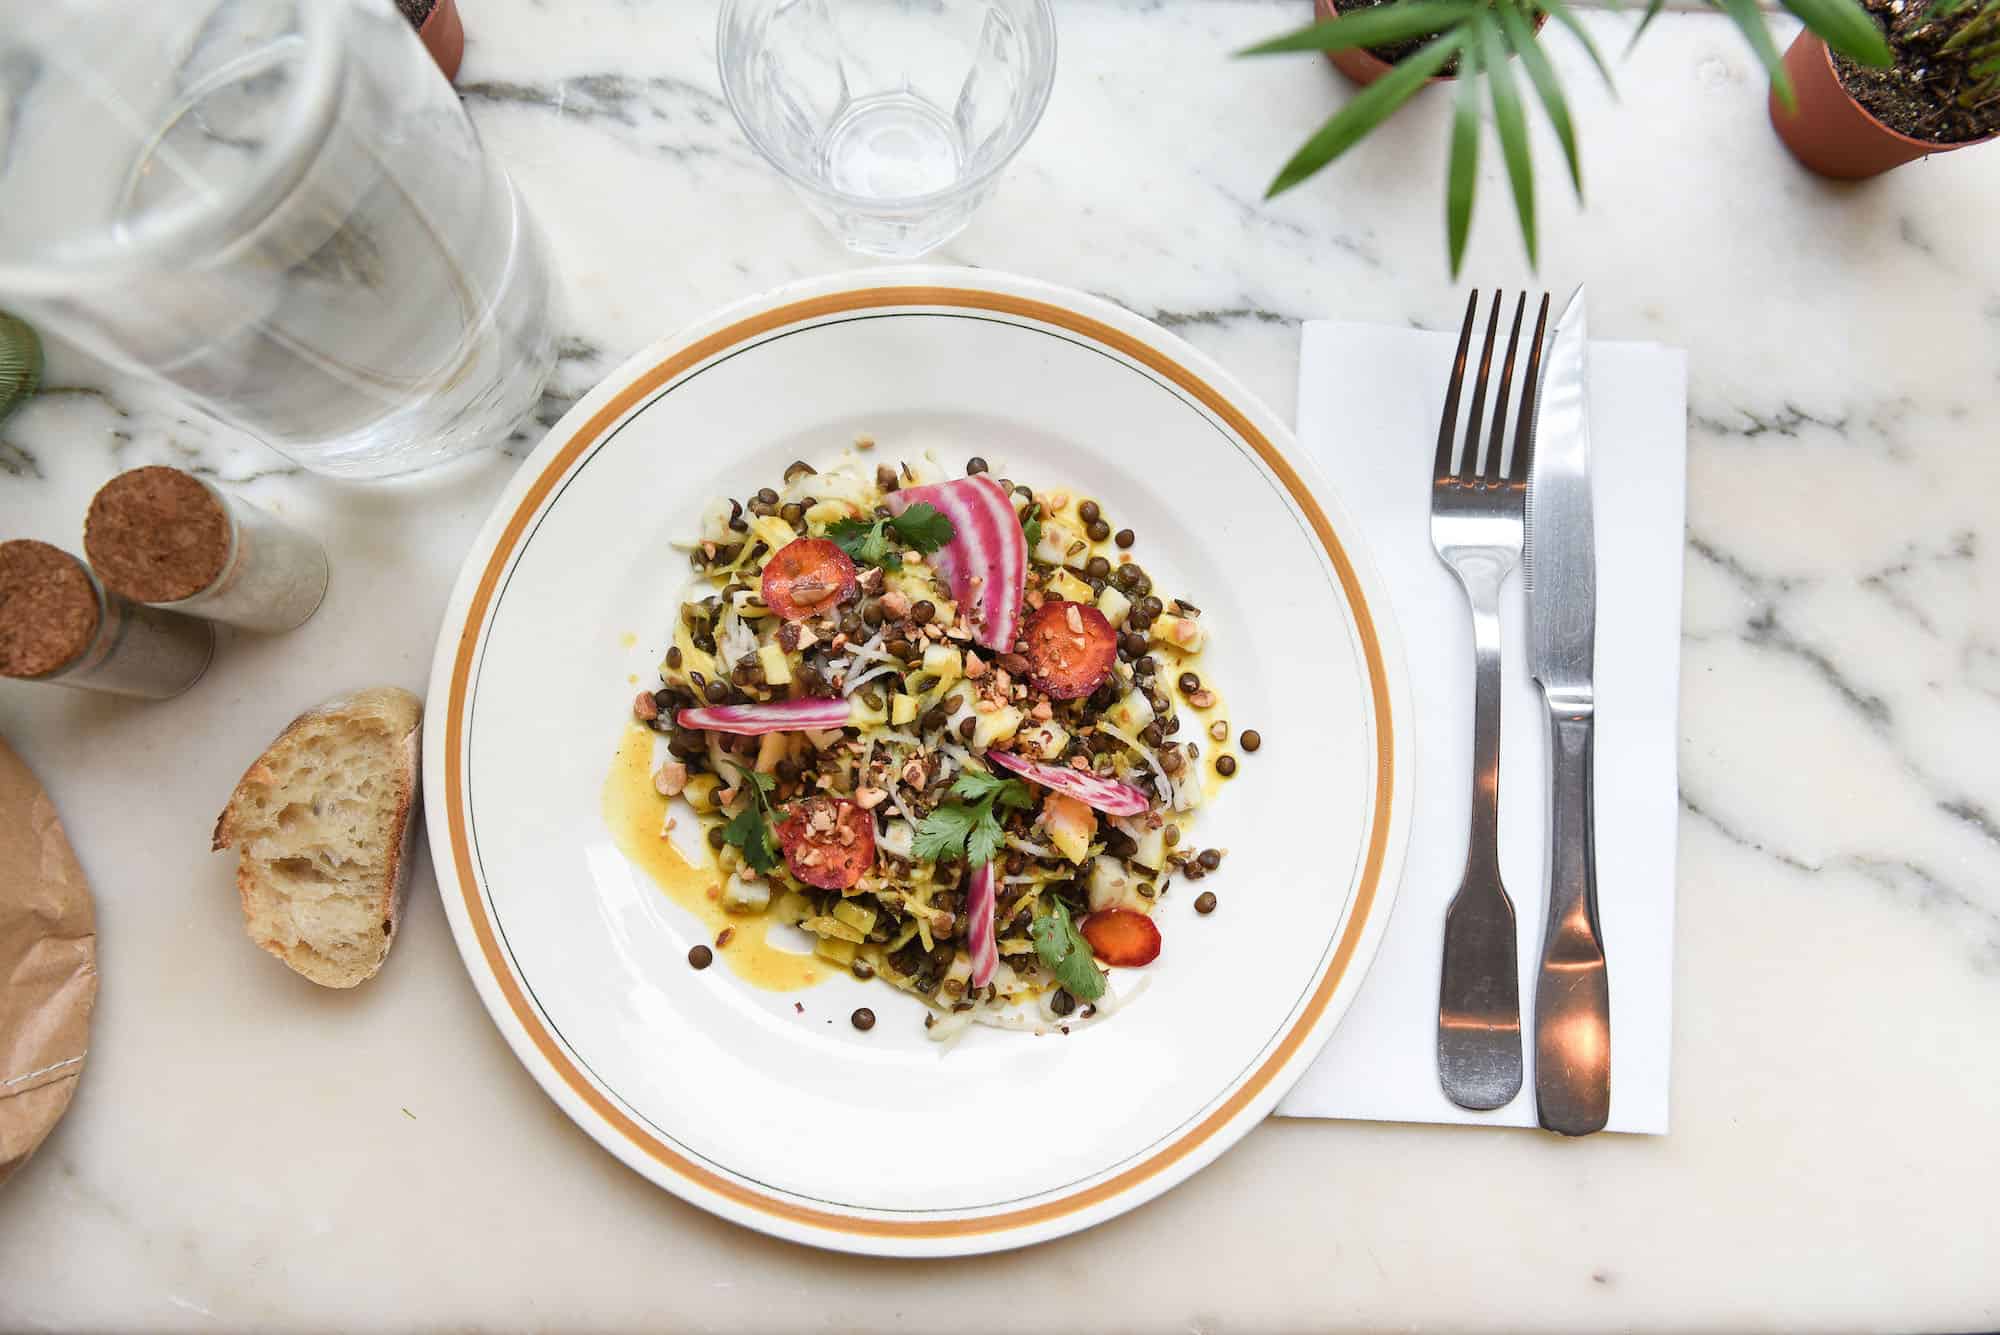 Where to go for a gluten-free lunch in Paris and taste fresh salads like this one.